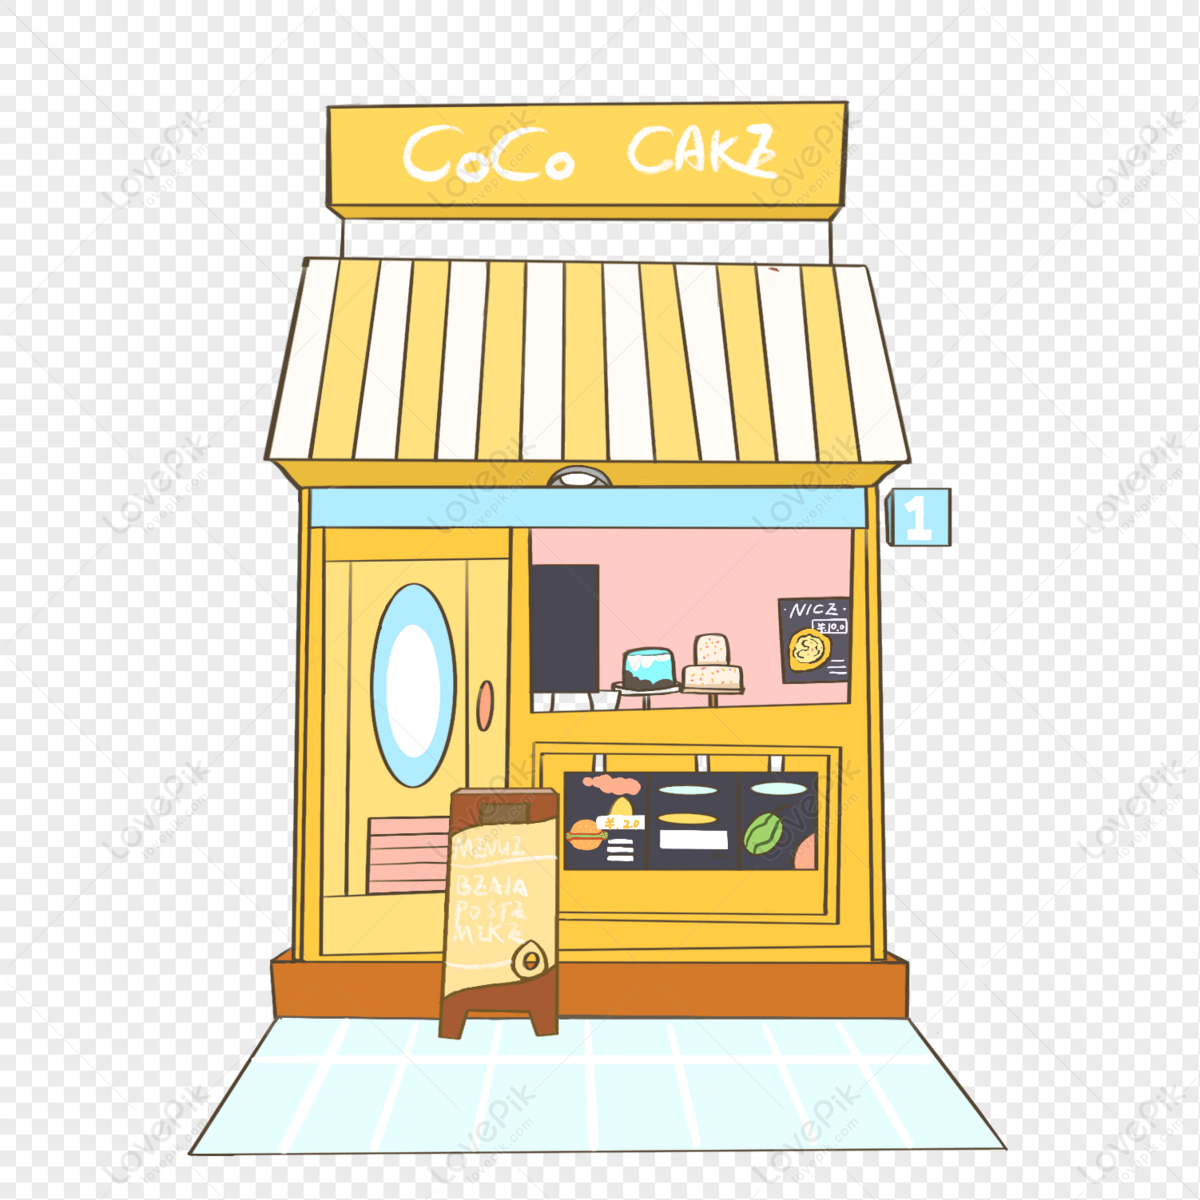 Delicious Cake Shop PNG Transparent And Clipart Image For Free Download -  Lovepik | 401538066